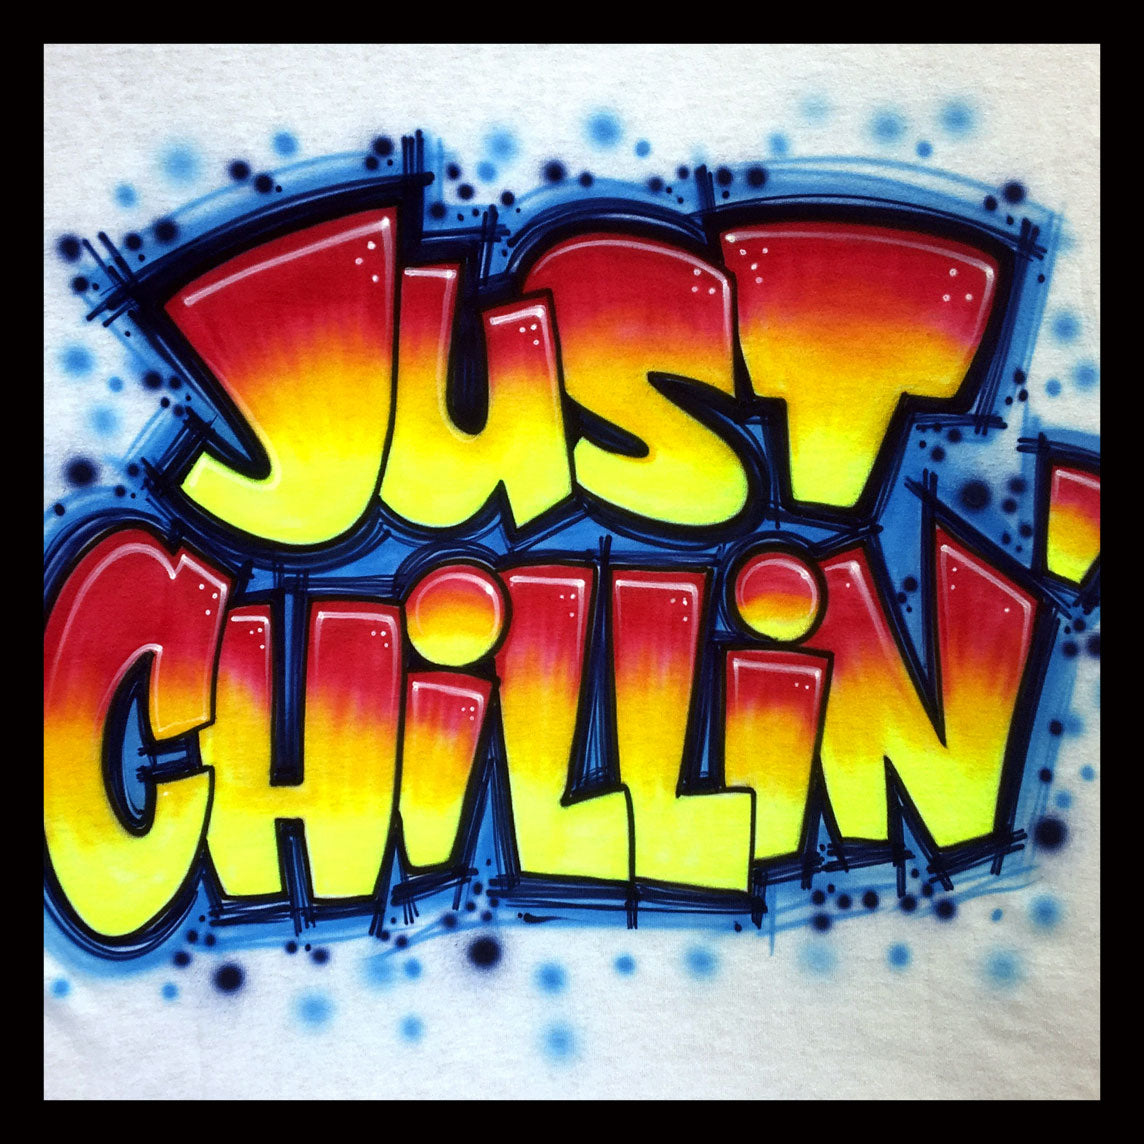 Airbrush T-Shirt - Just Chillin' - Personalized - Customized - Party Shirt